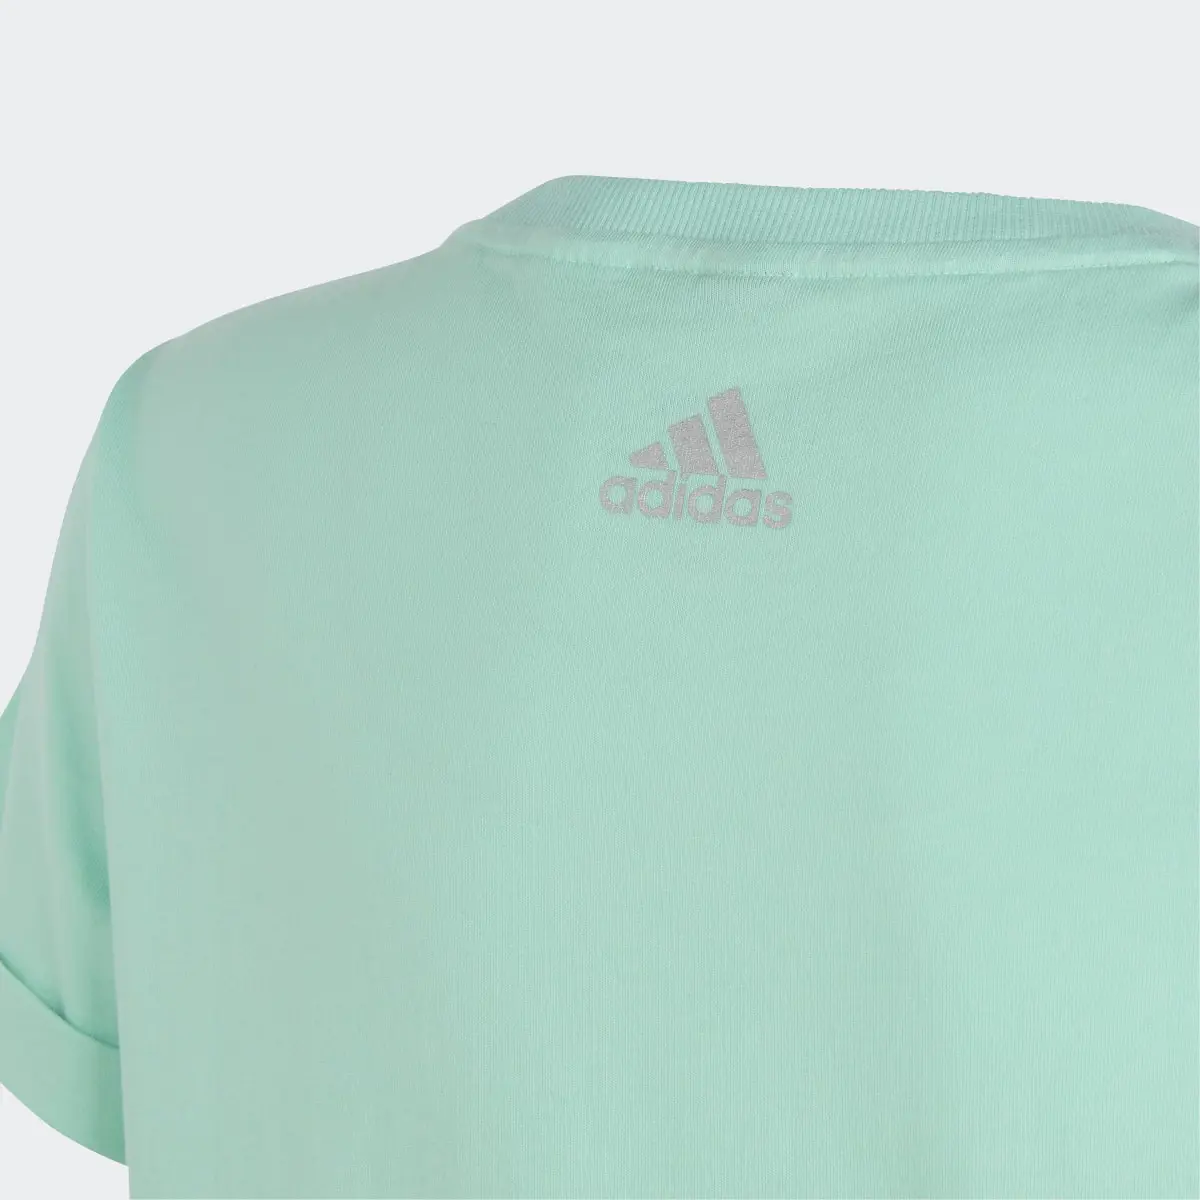 Adidas Dance Knotted Tee. 3